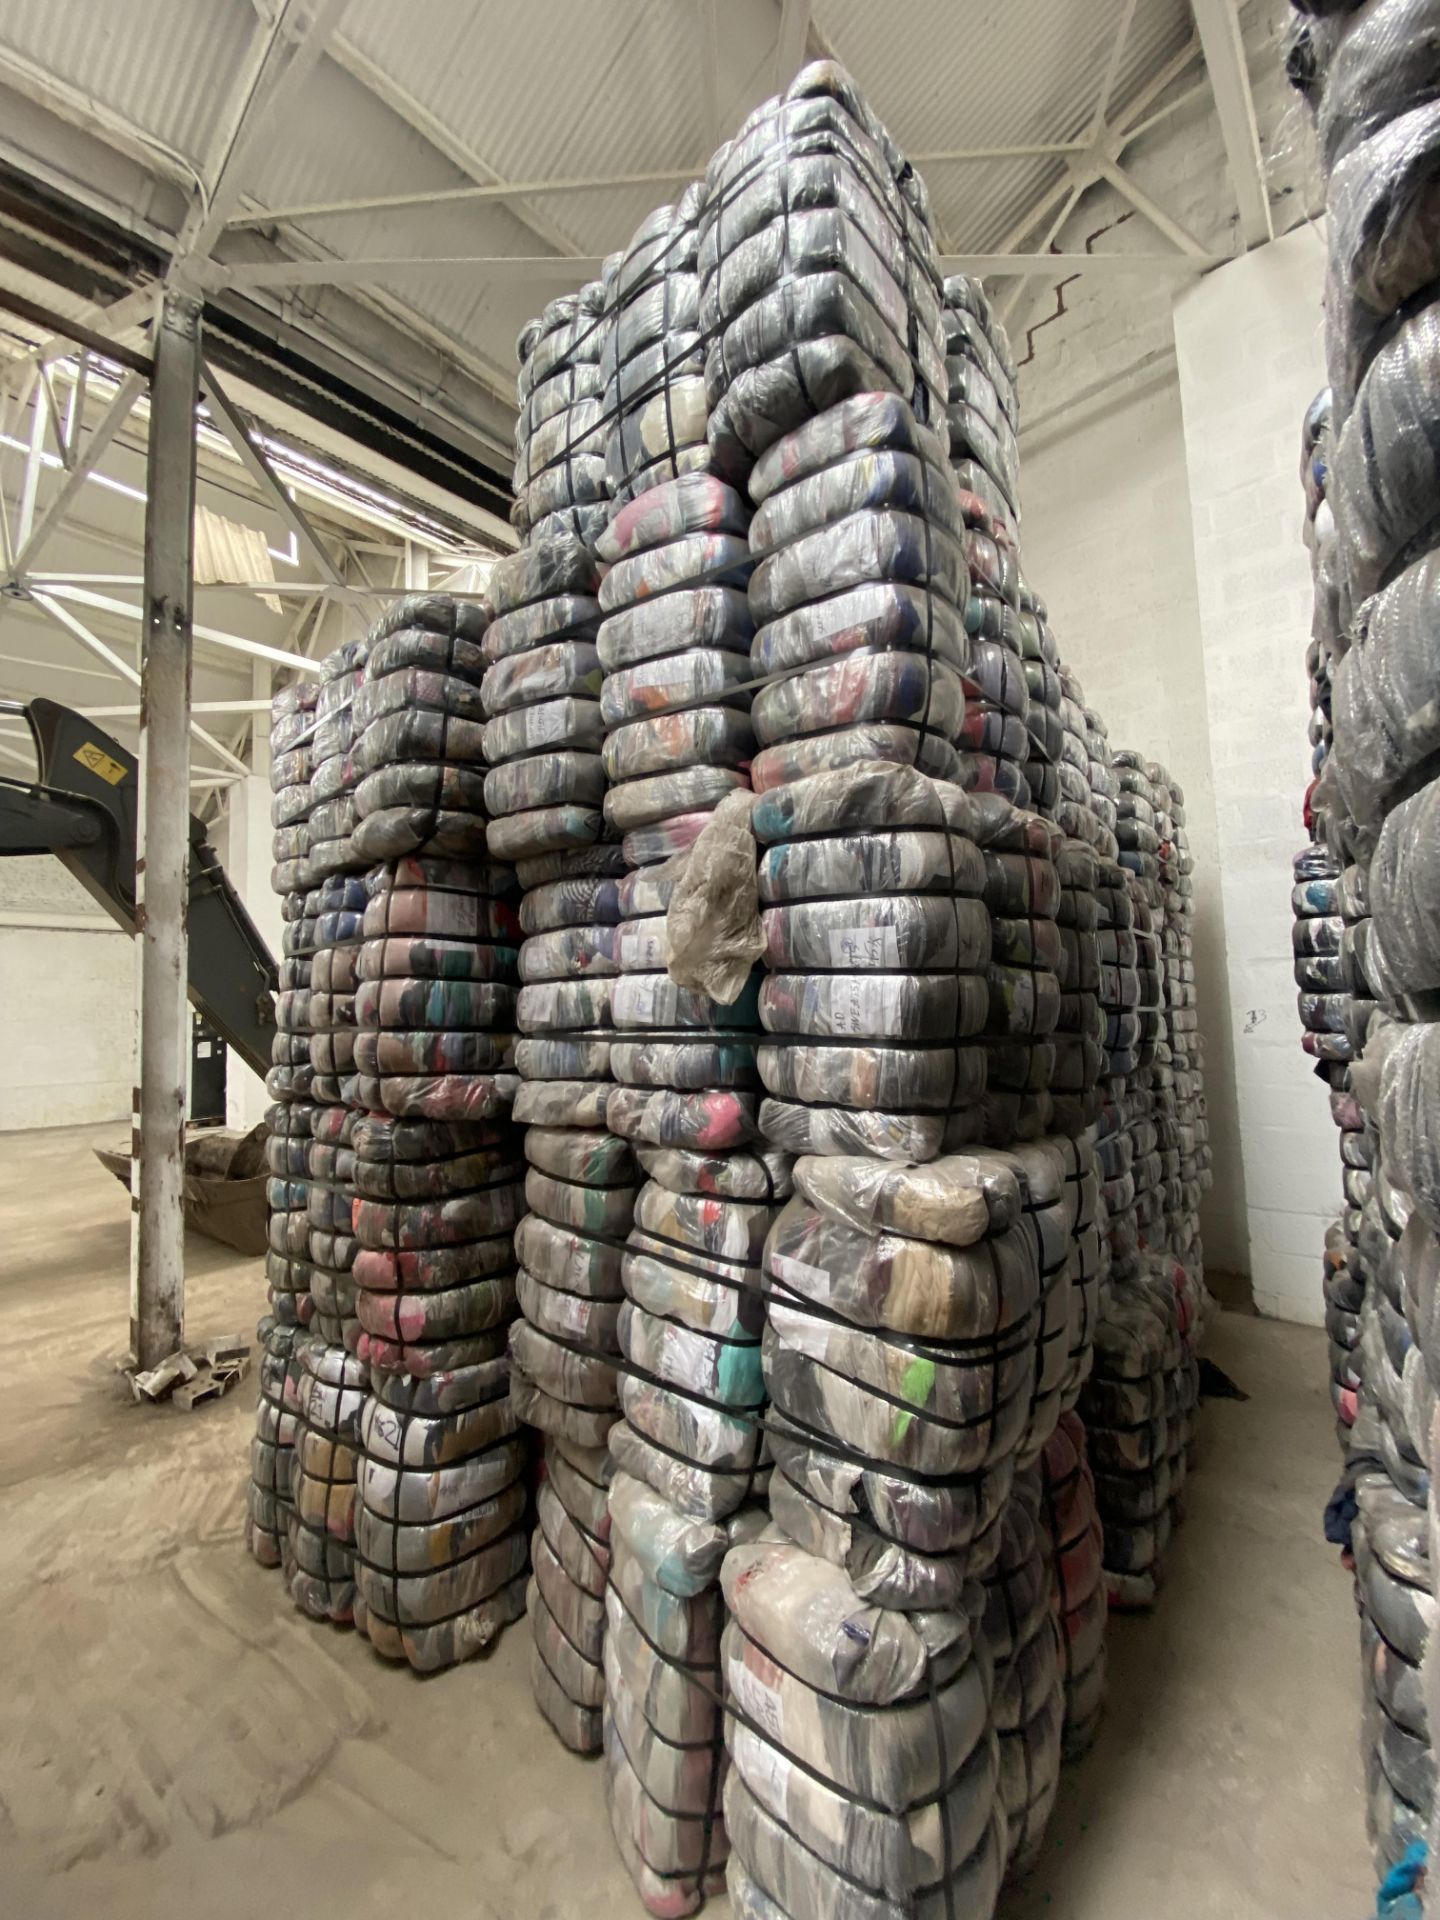 APPROX 211 BALES (9495KG) RECYCLABLE WASTE TEXTILES, understood to comprise: Three bale x 45kg - Bild 8 aus 8